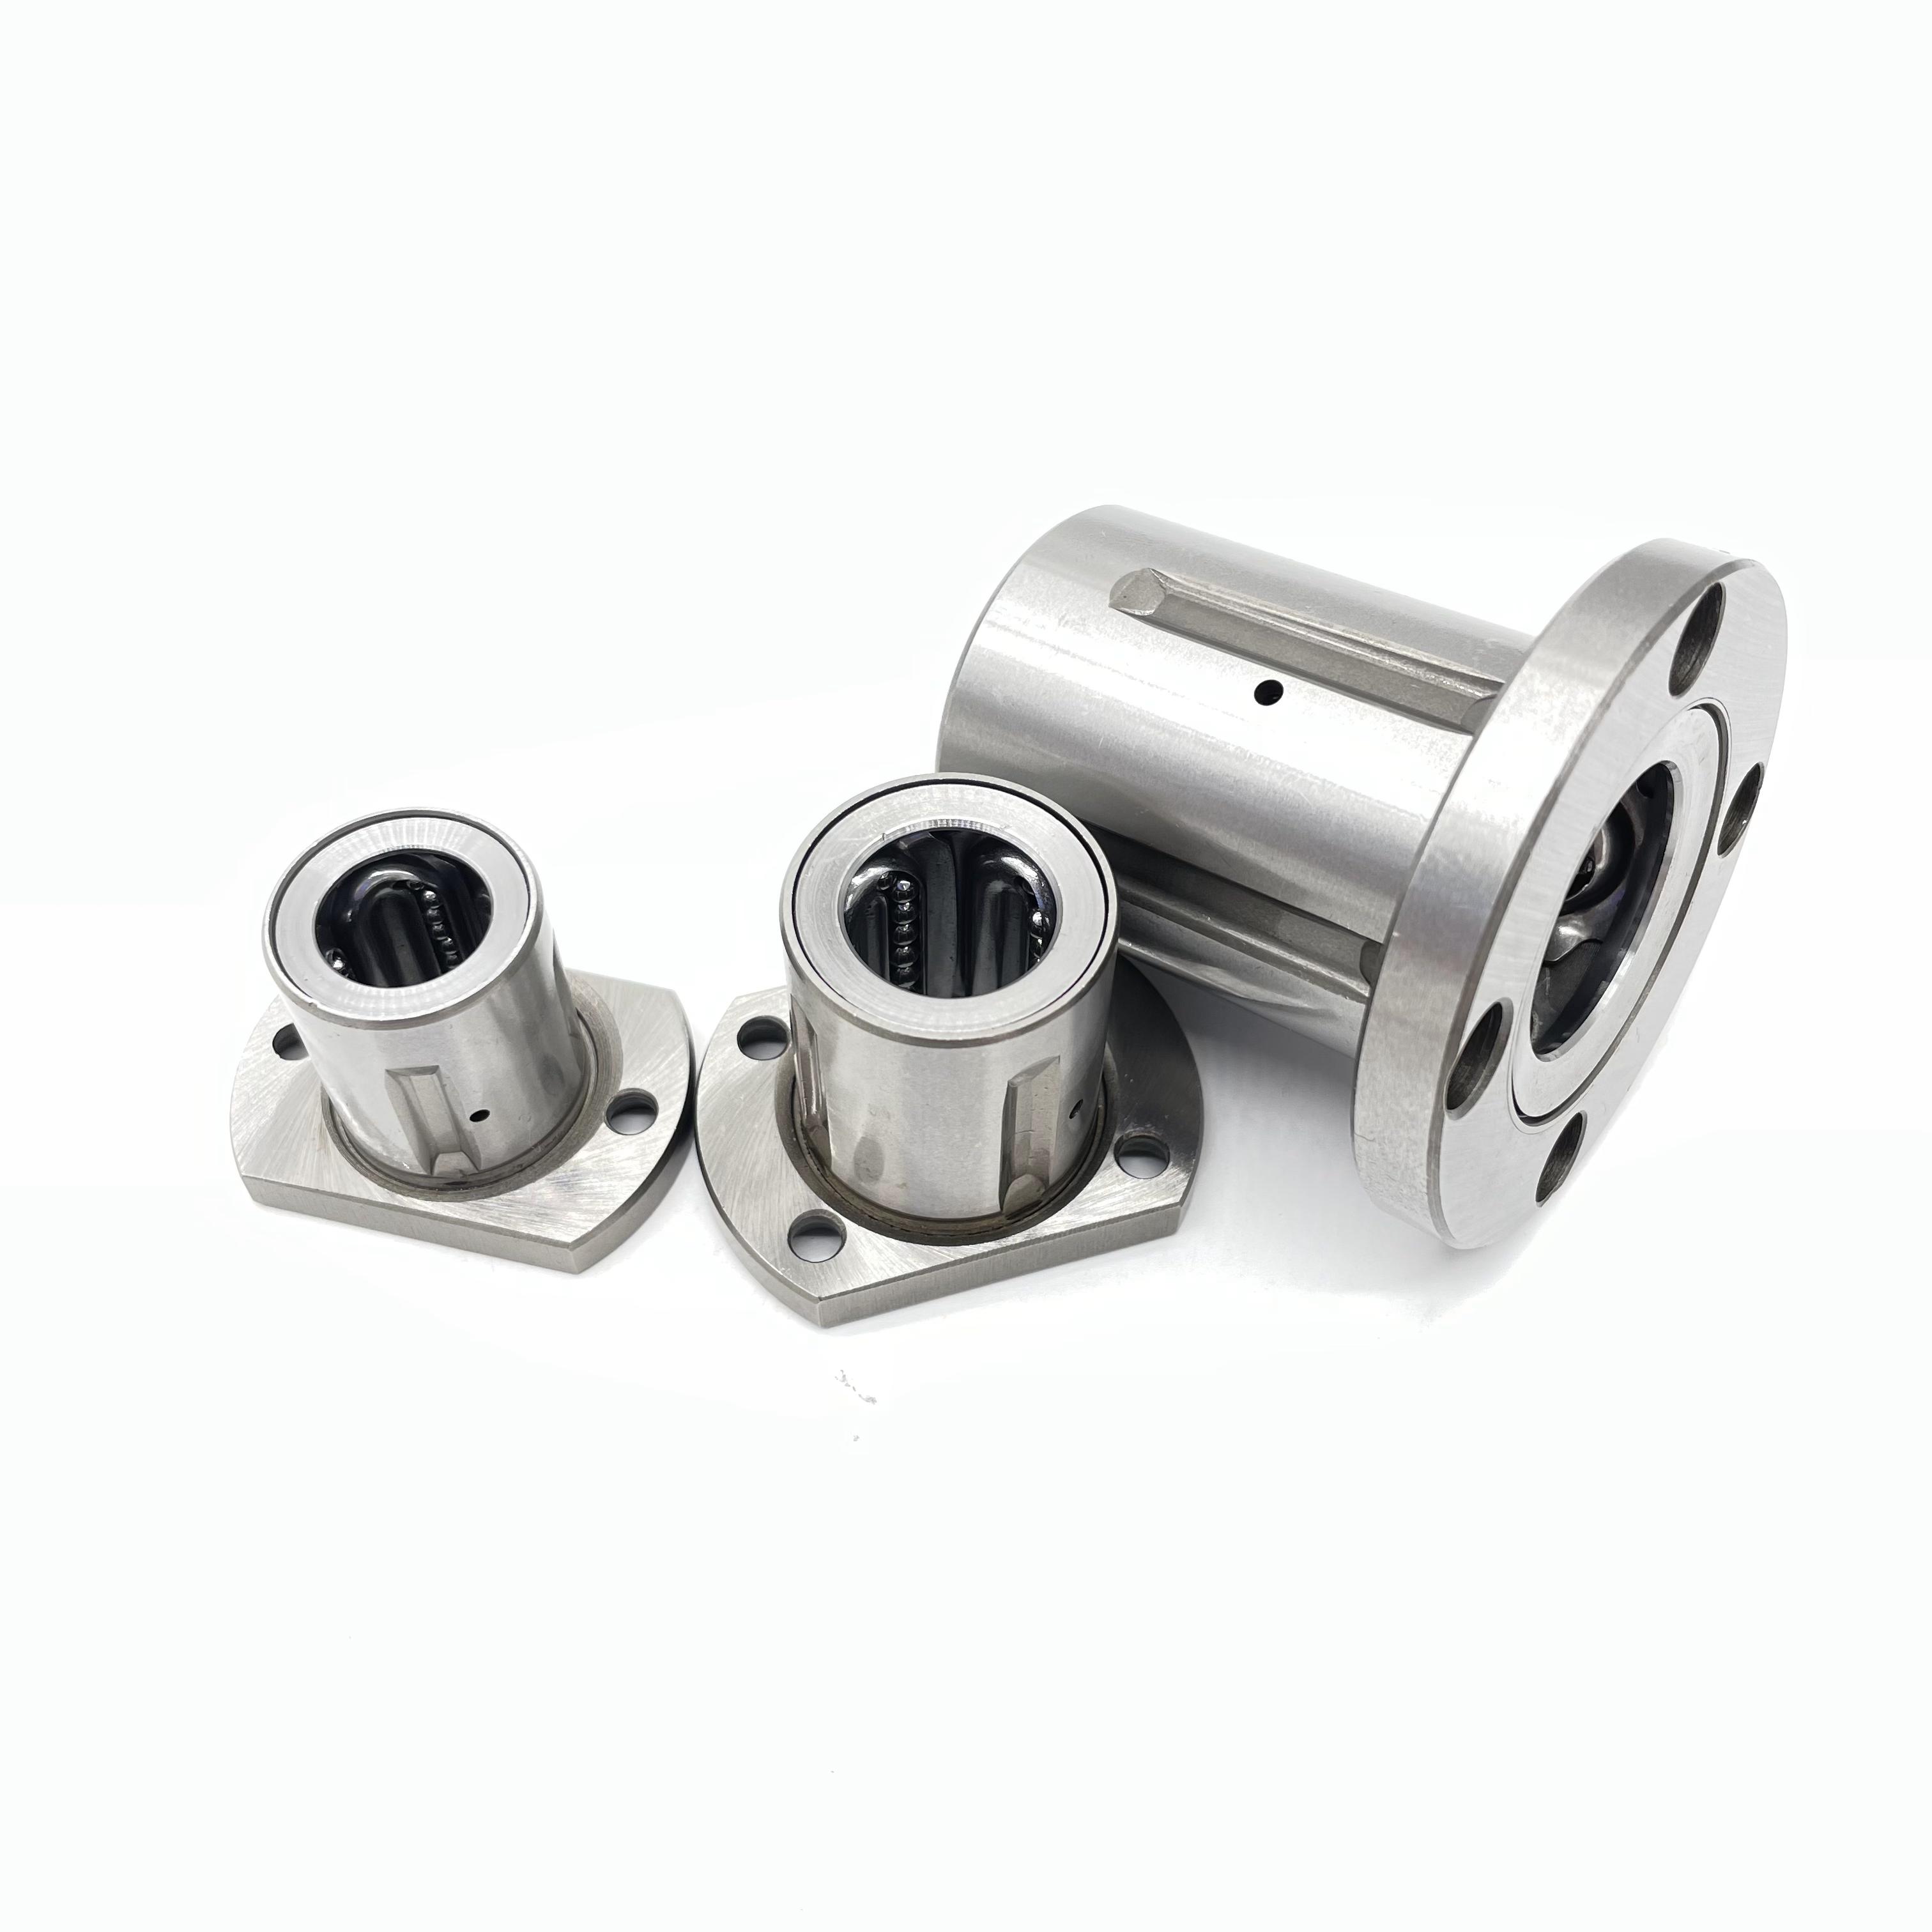 Top-quality Rolling and Wheel Bearings from China: Latest News